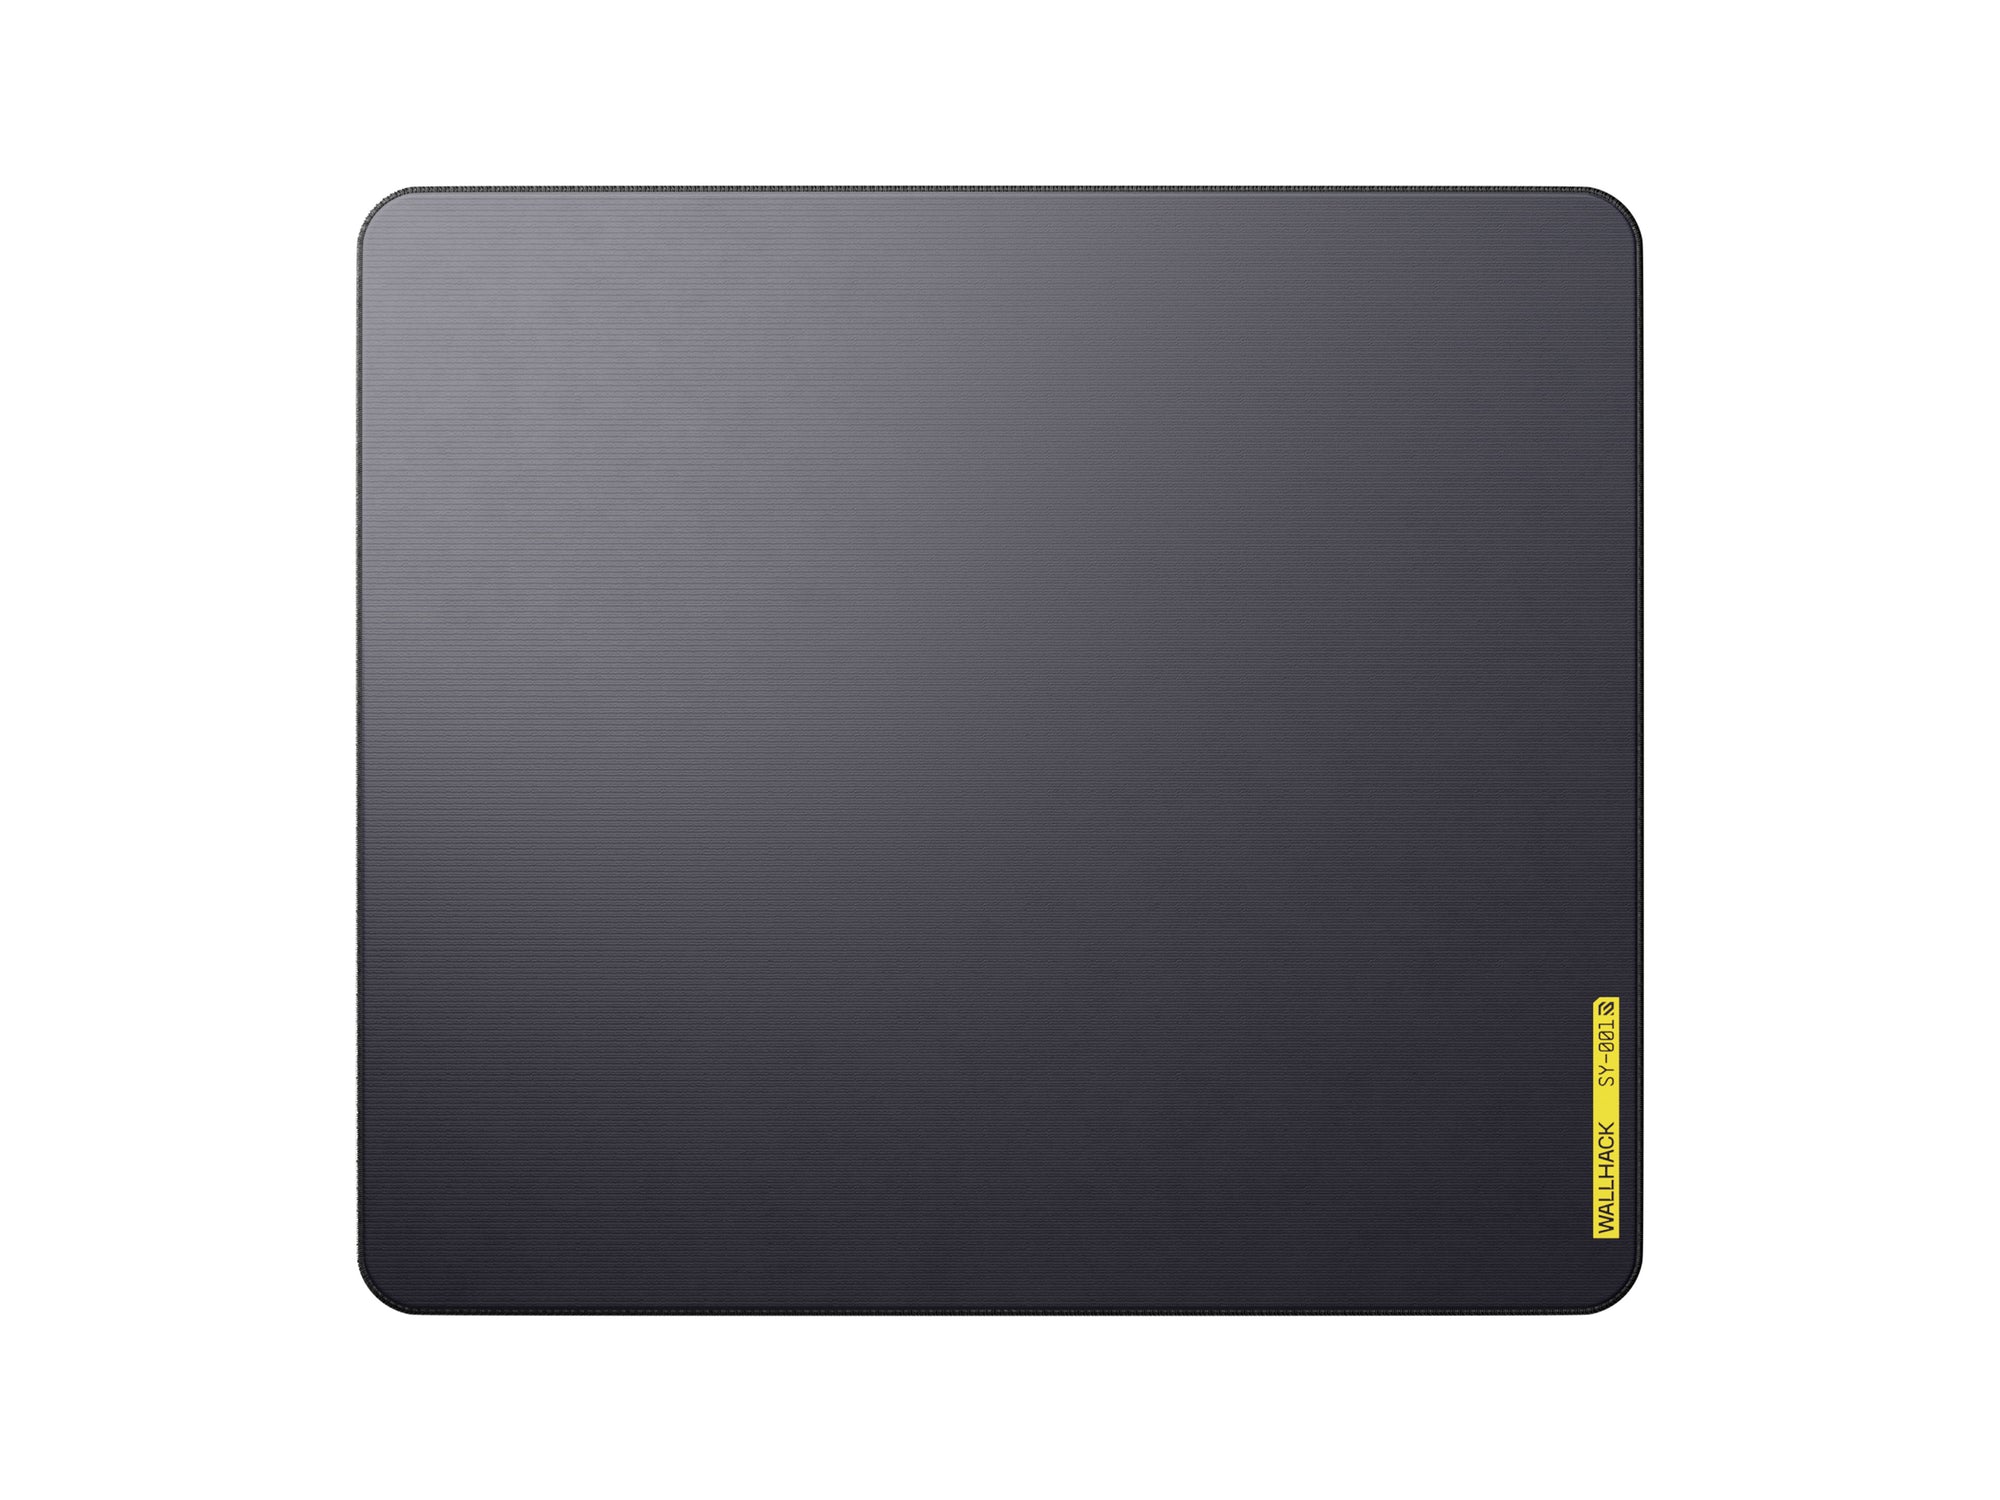 Black colored WALLHACK SY-001 Mouse Pad from the front angle with a yellow logo